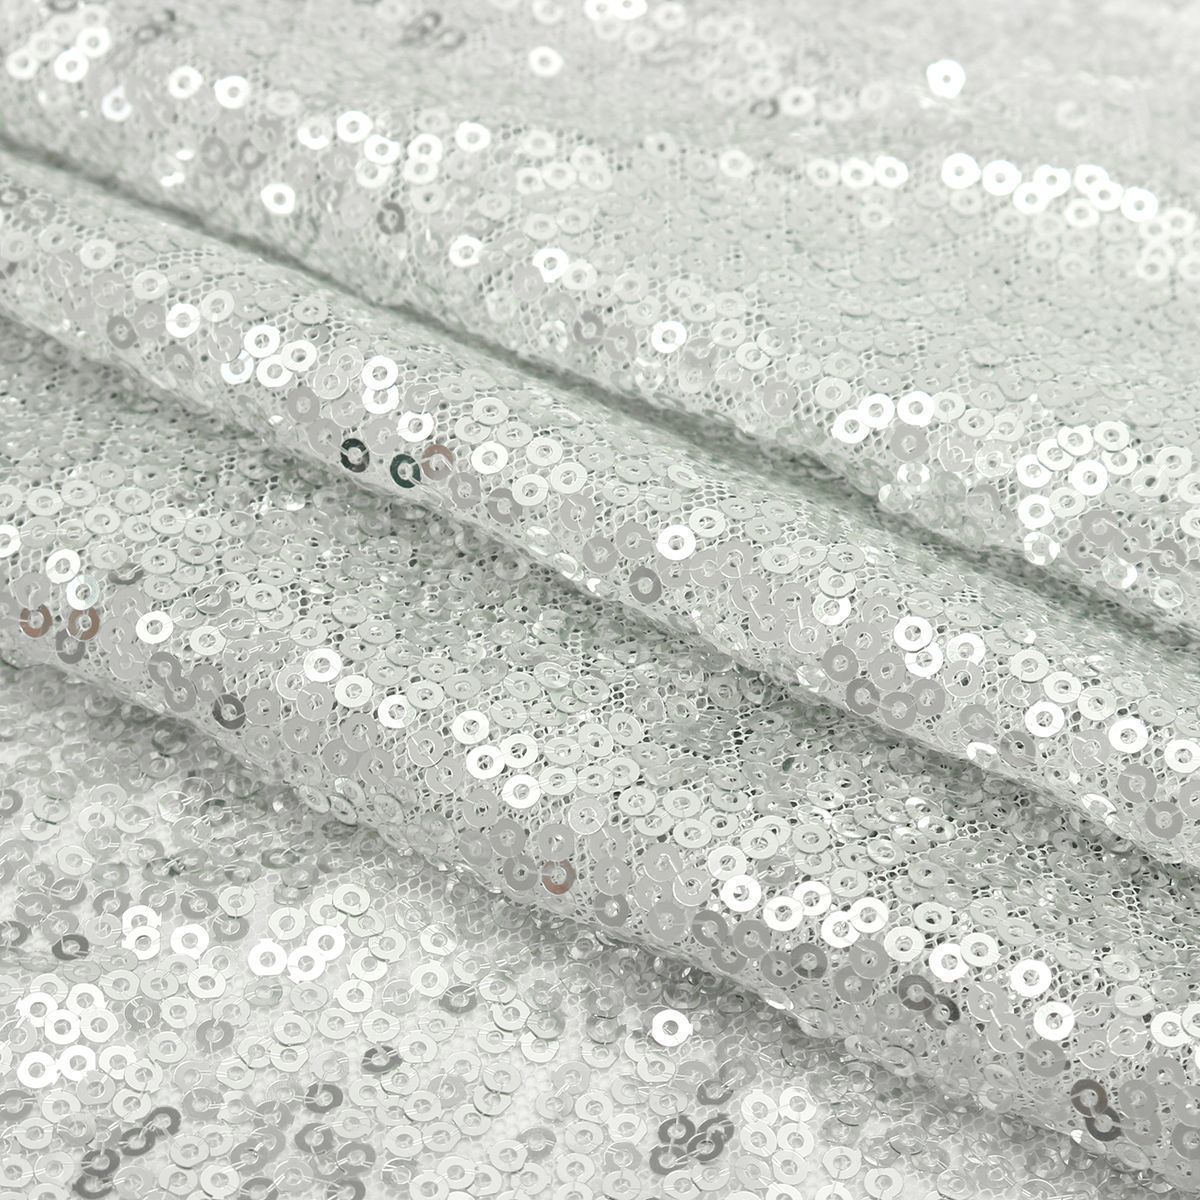 2-Panels-2FTX7FT-Silver-Shimmer-Sequins-Fabric-Wedding-Photography-Backdrop-1160118